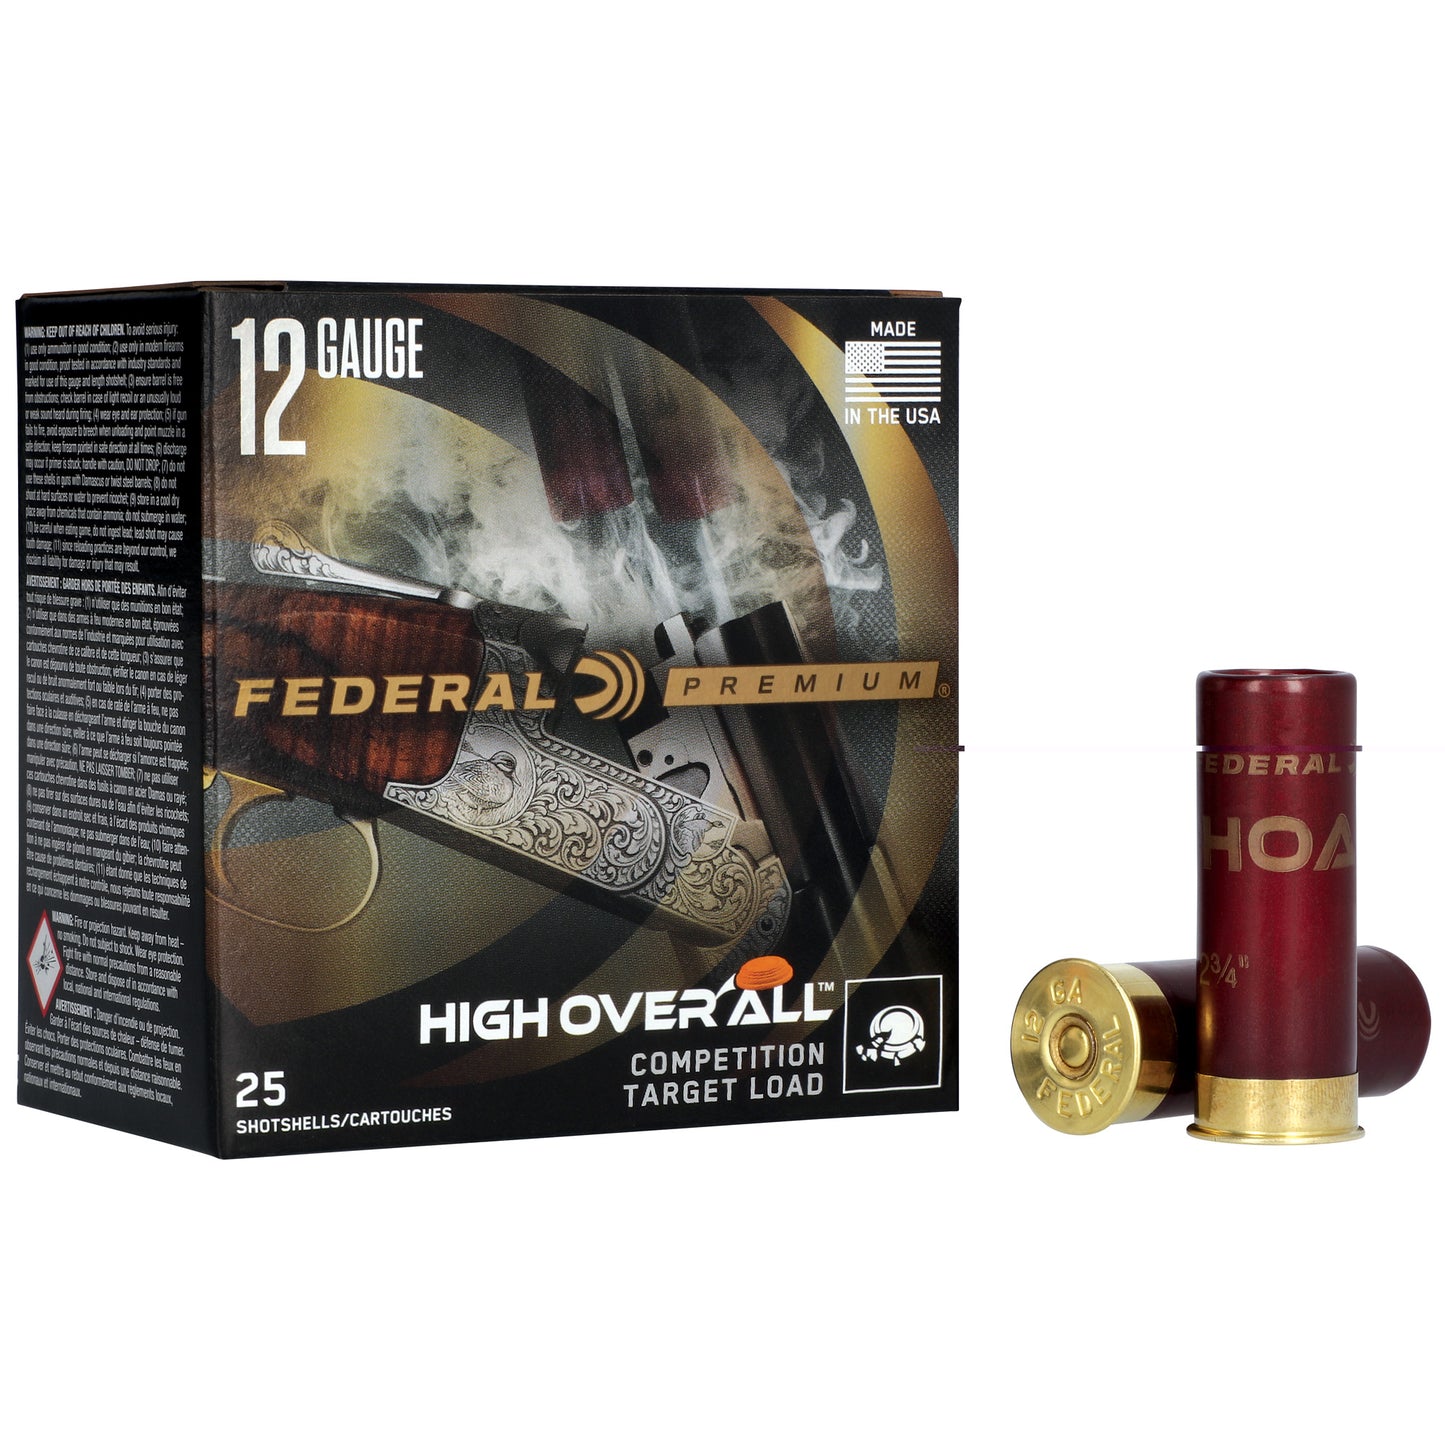 Federal, Premium, High Over All, Competition Target Load, 12 Gauge 2.75", #9, 2 3/4 Dram, 1 1/8 oz, Lead, 25, Round Box